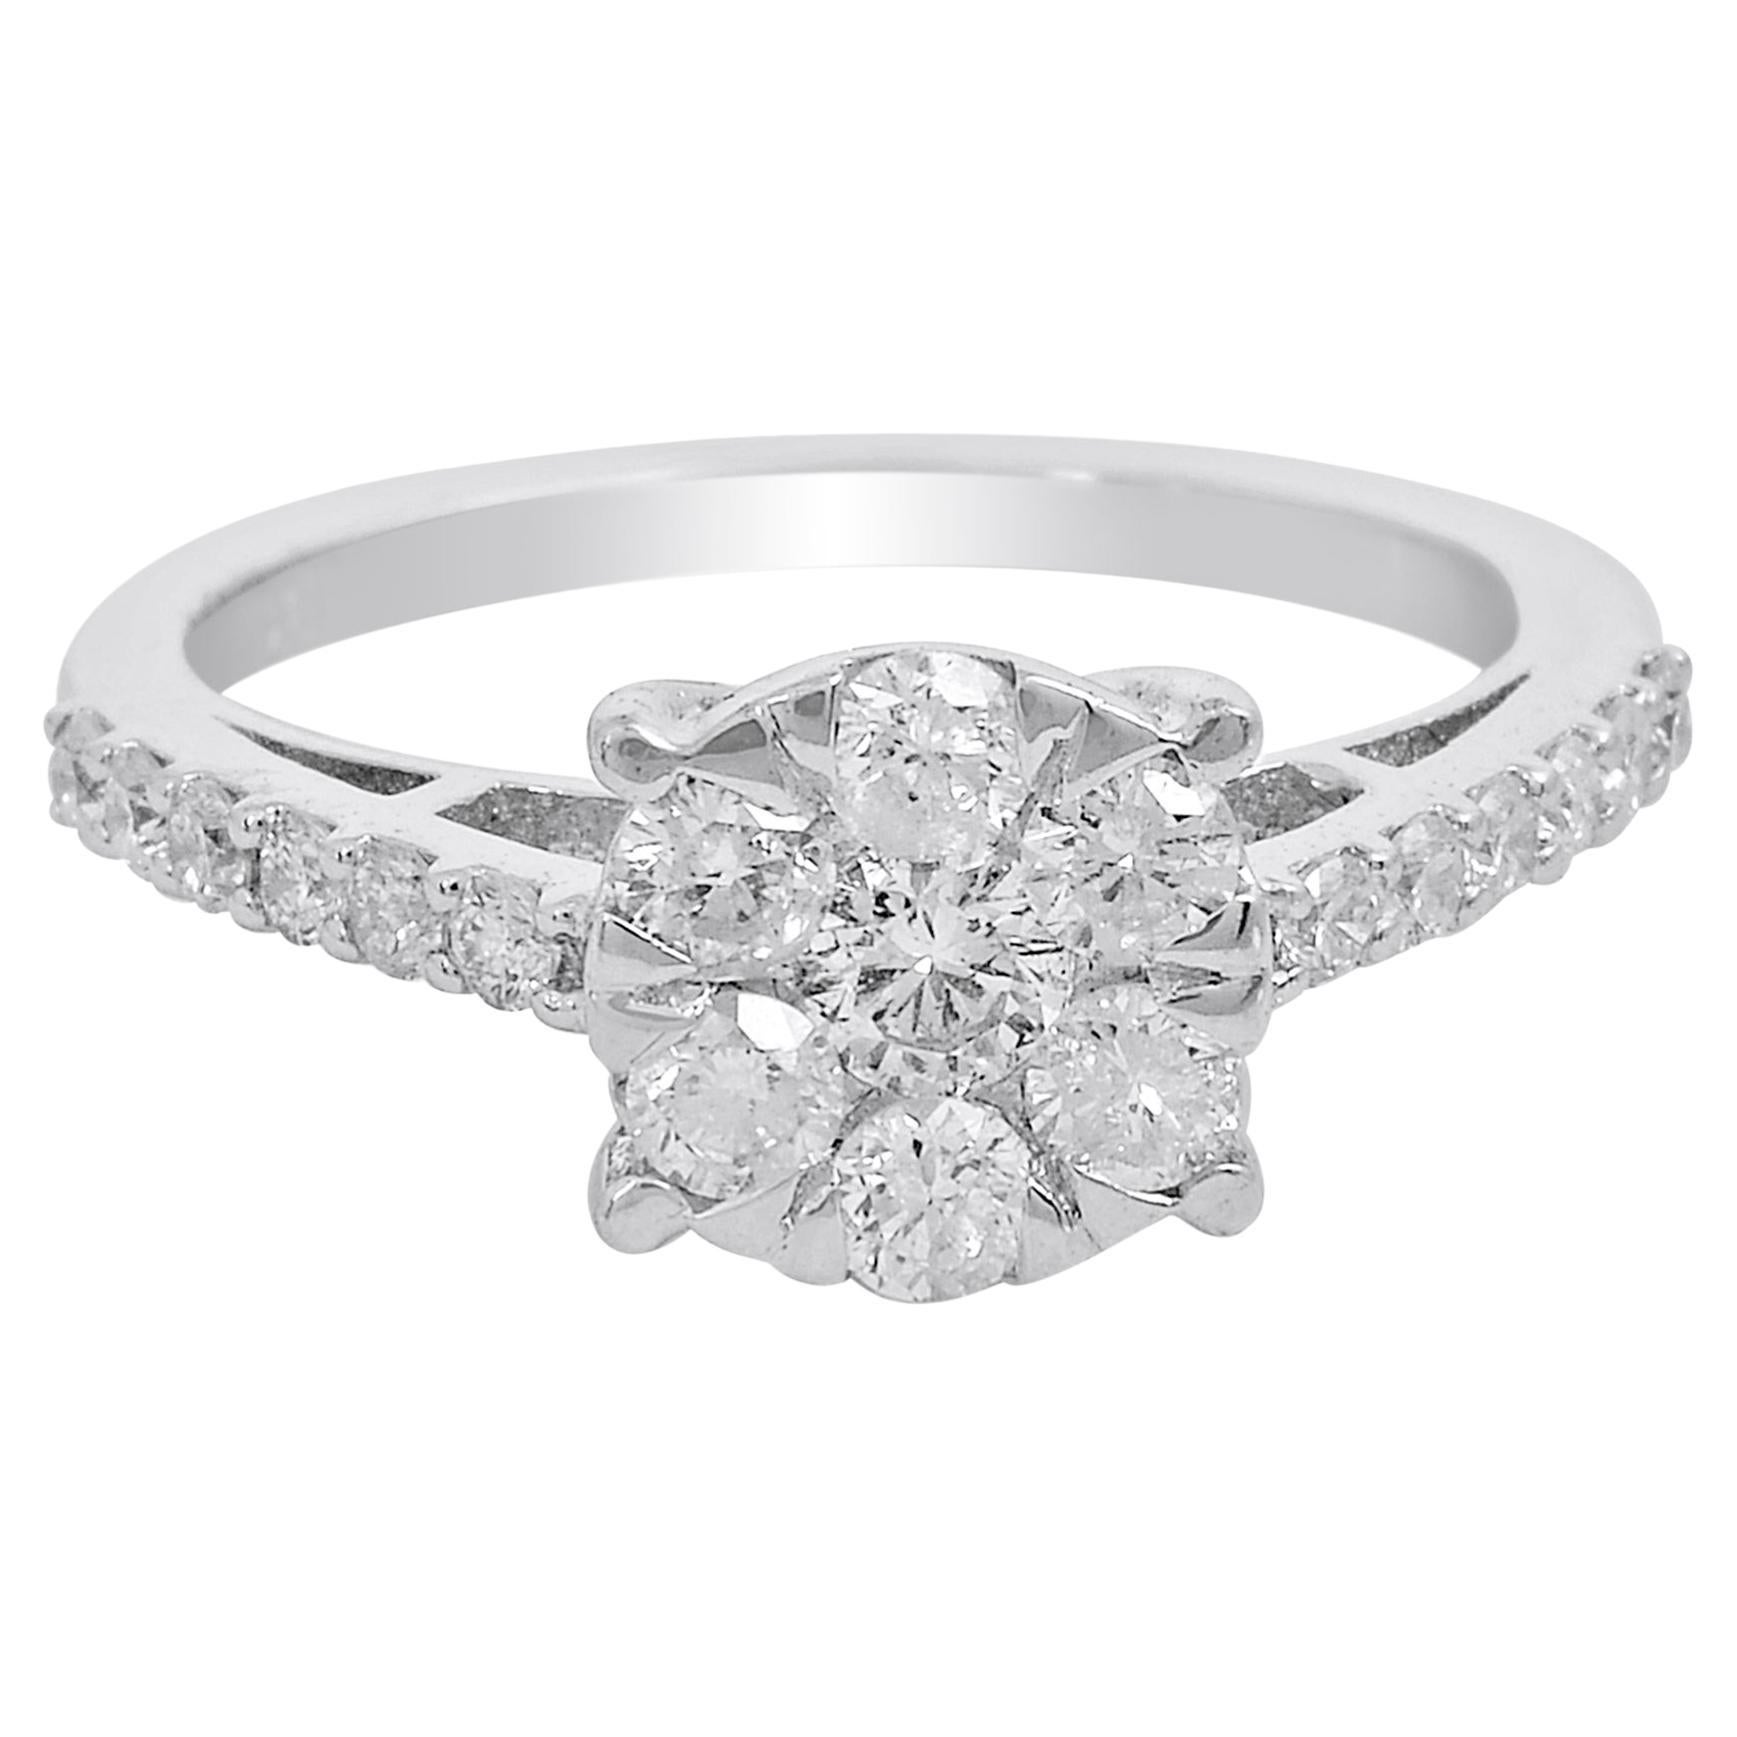 0.95 Carat SI Clarity HI Color Diamond Promise Ring 18 Karat White Gold Jewelry For Sale